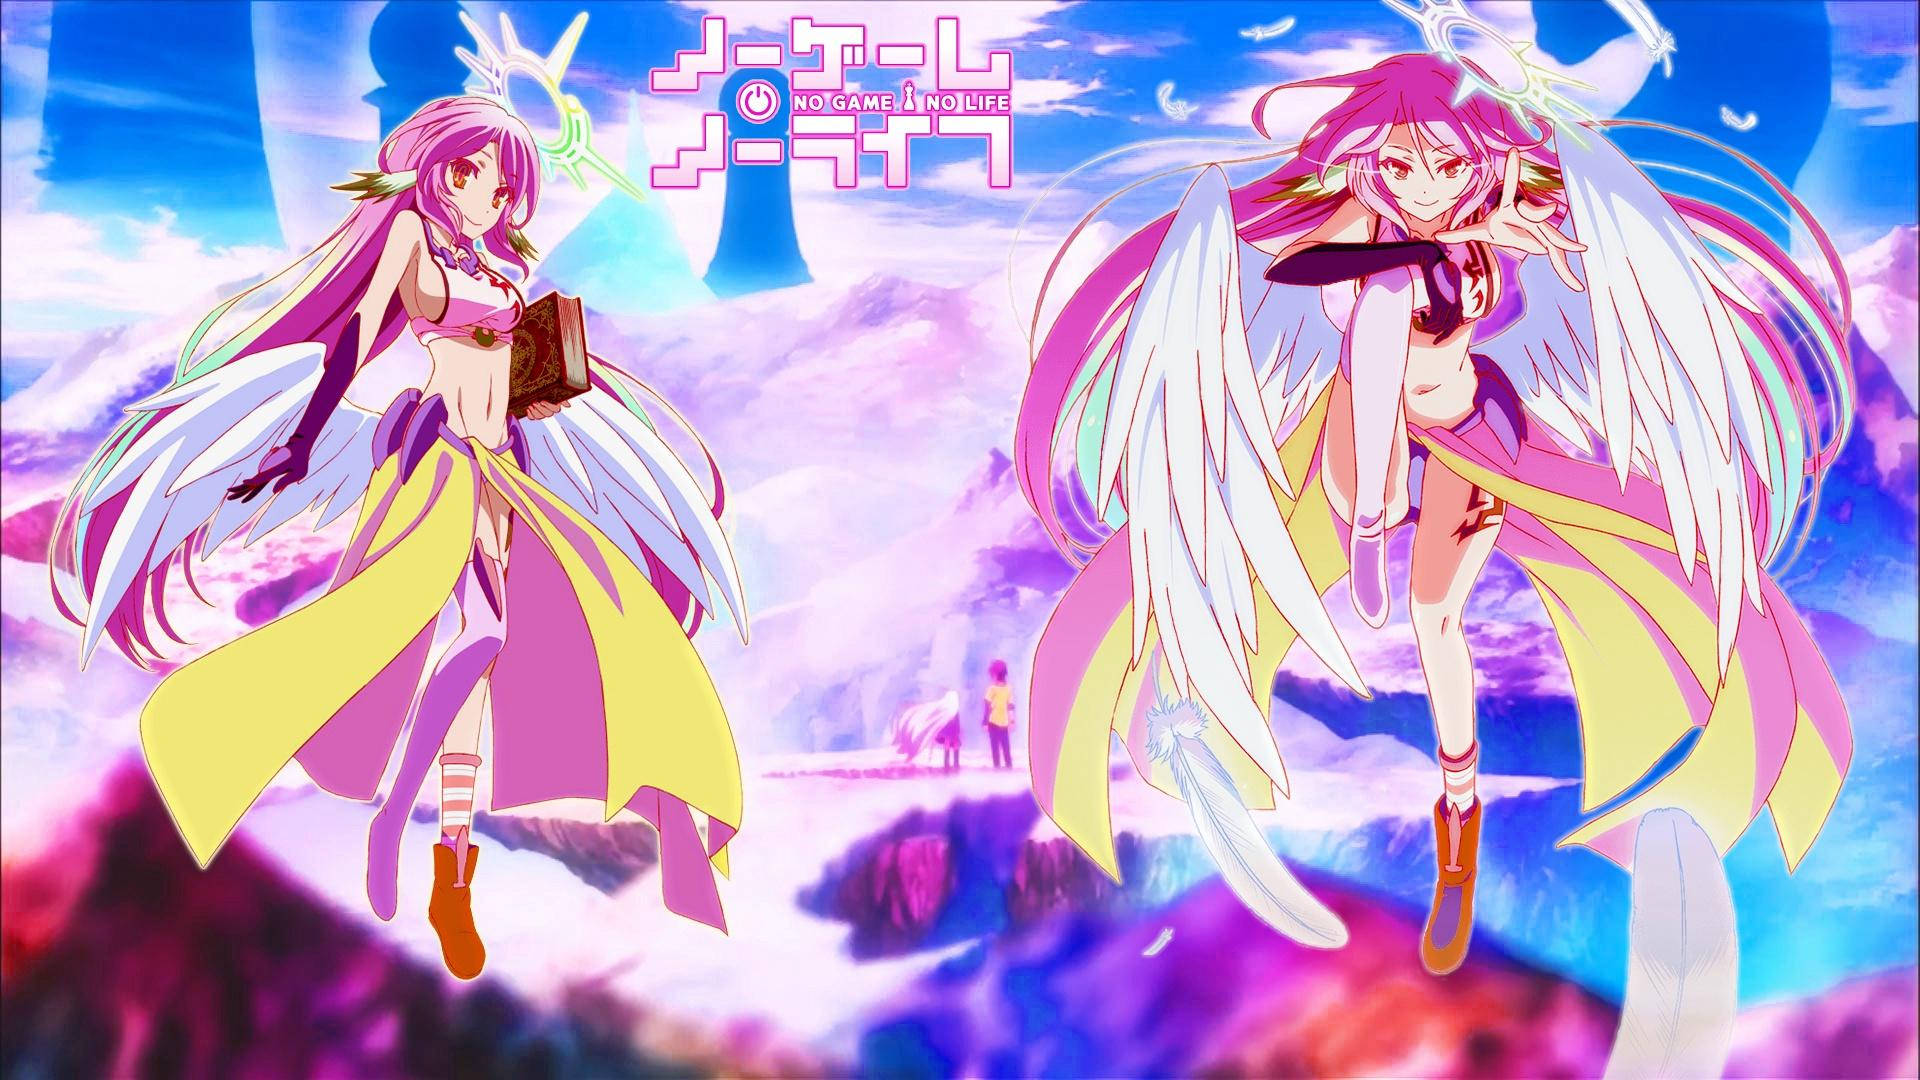 The wise and all-knowing Jibril from No Game No Life Wallpaper